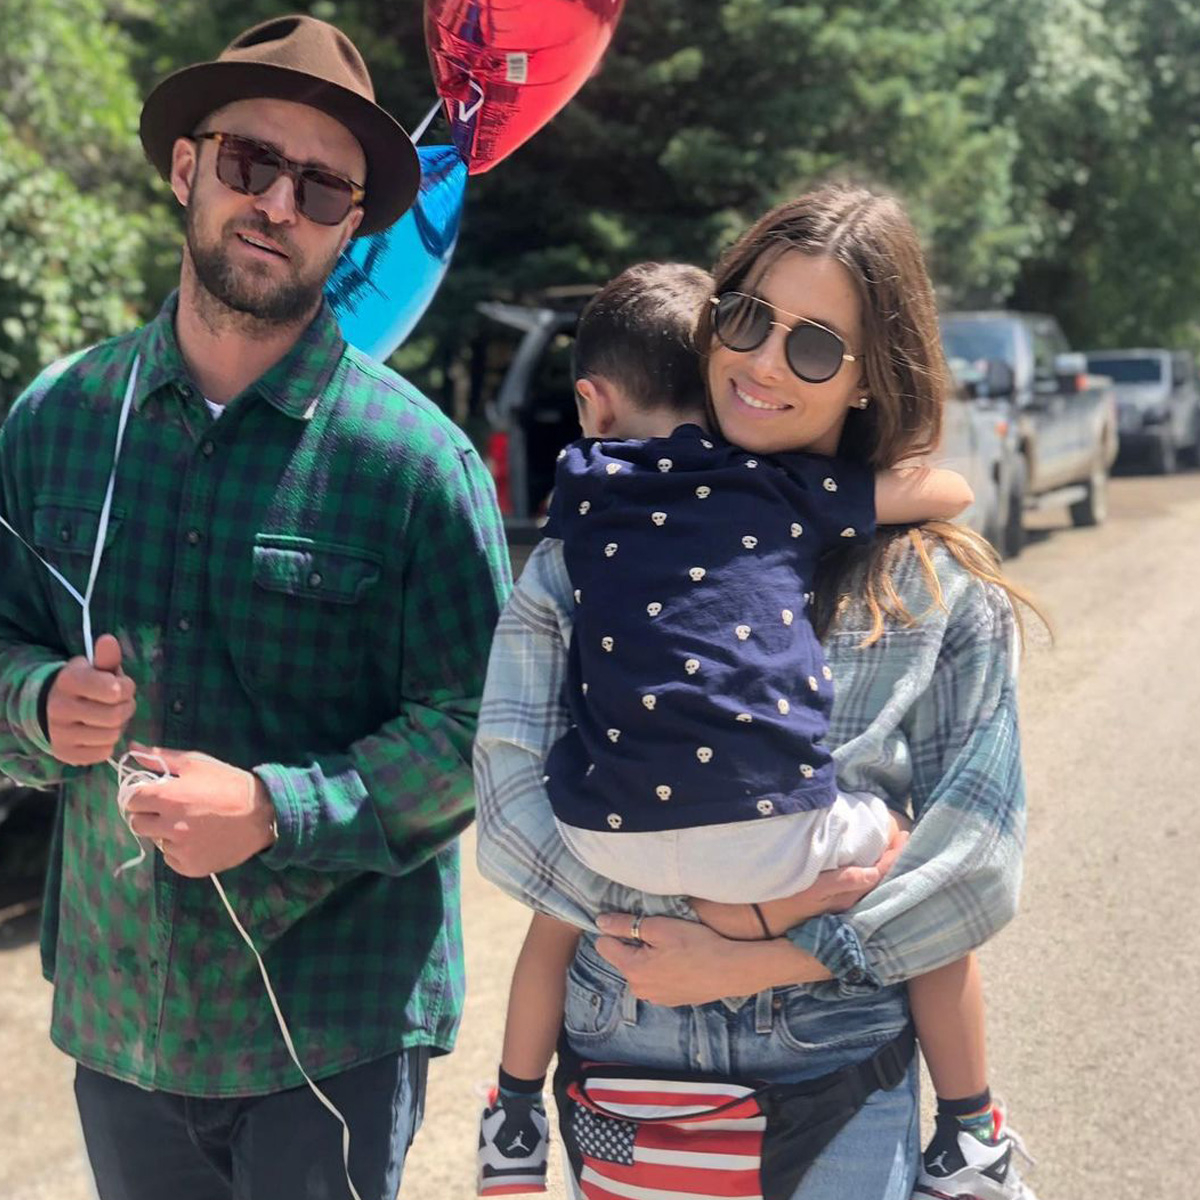 Justin Timberlake Confirms He and Wife Jessica Biel Welcomed Second Child  Named Phineas